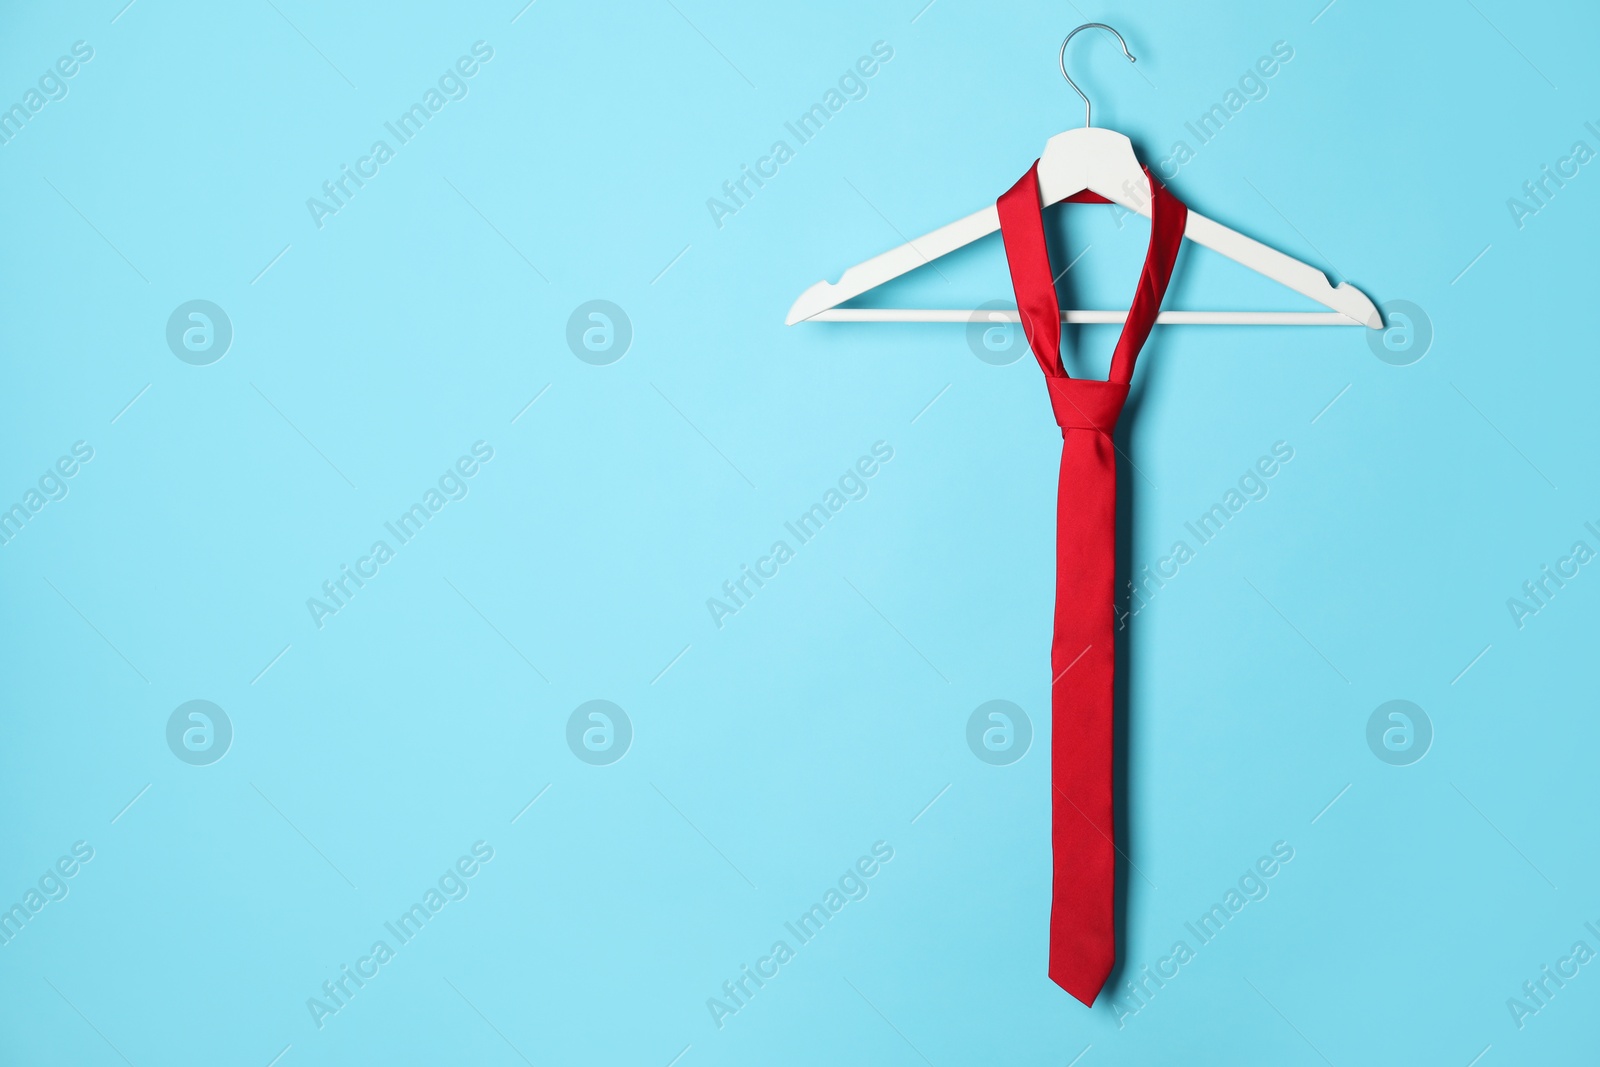 Photo of Hanger with red tie on light blue background. Space for text